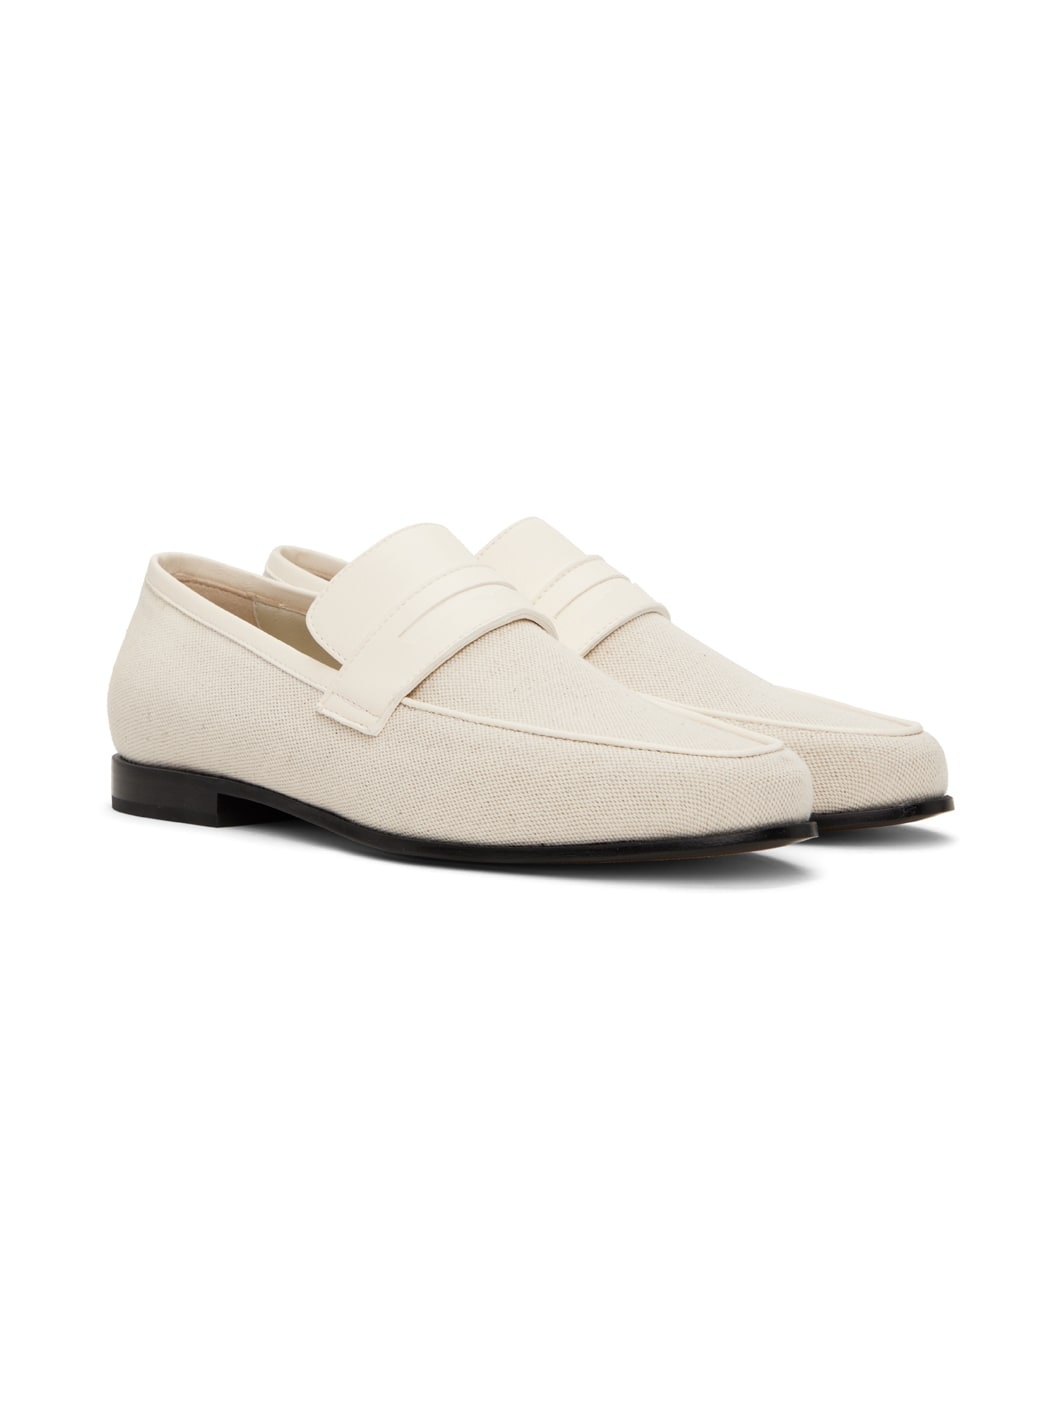 Off-White 'The Canvas' Penny Loafers - 4